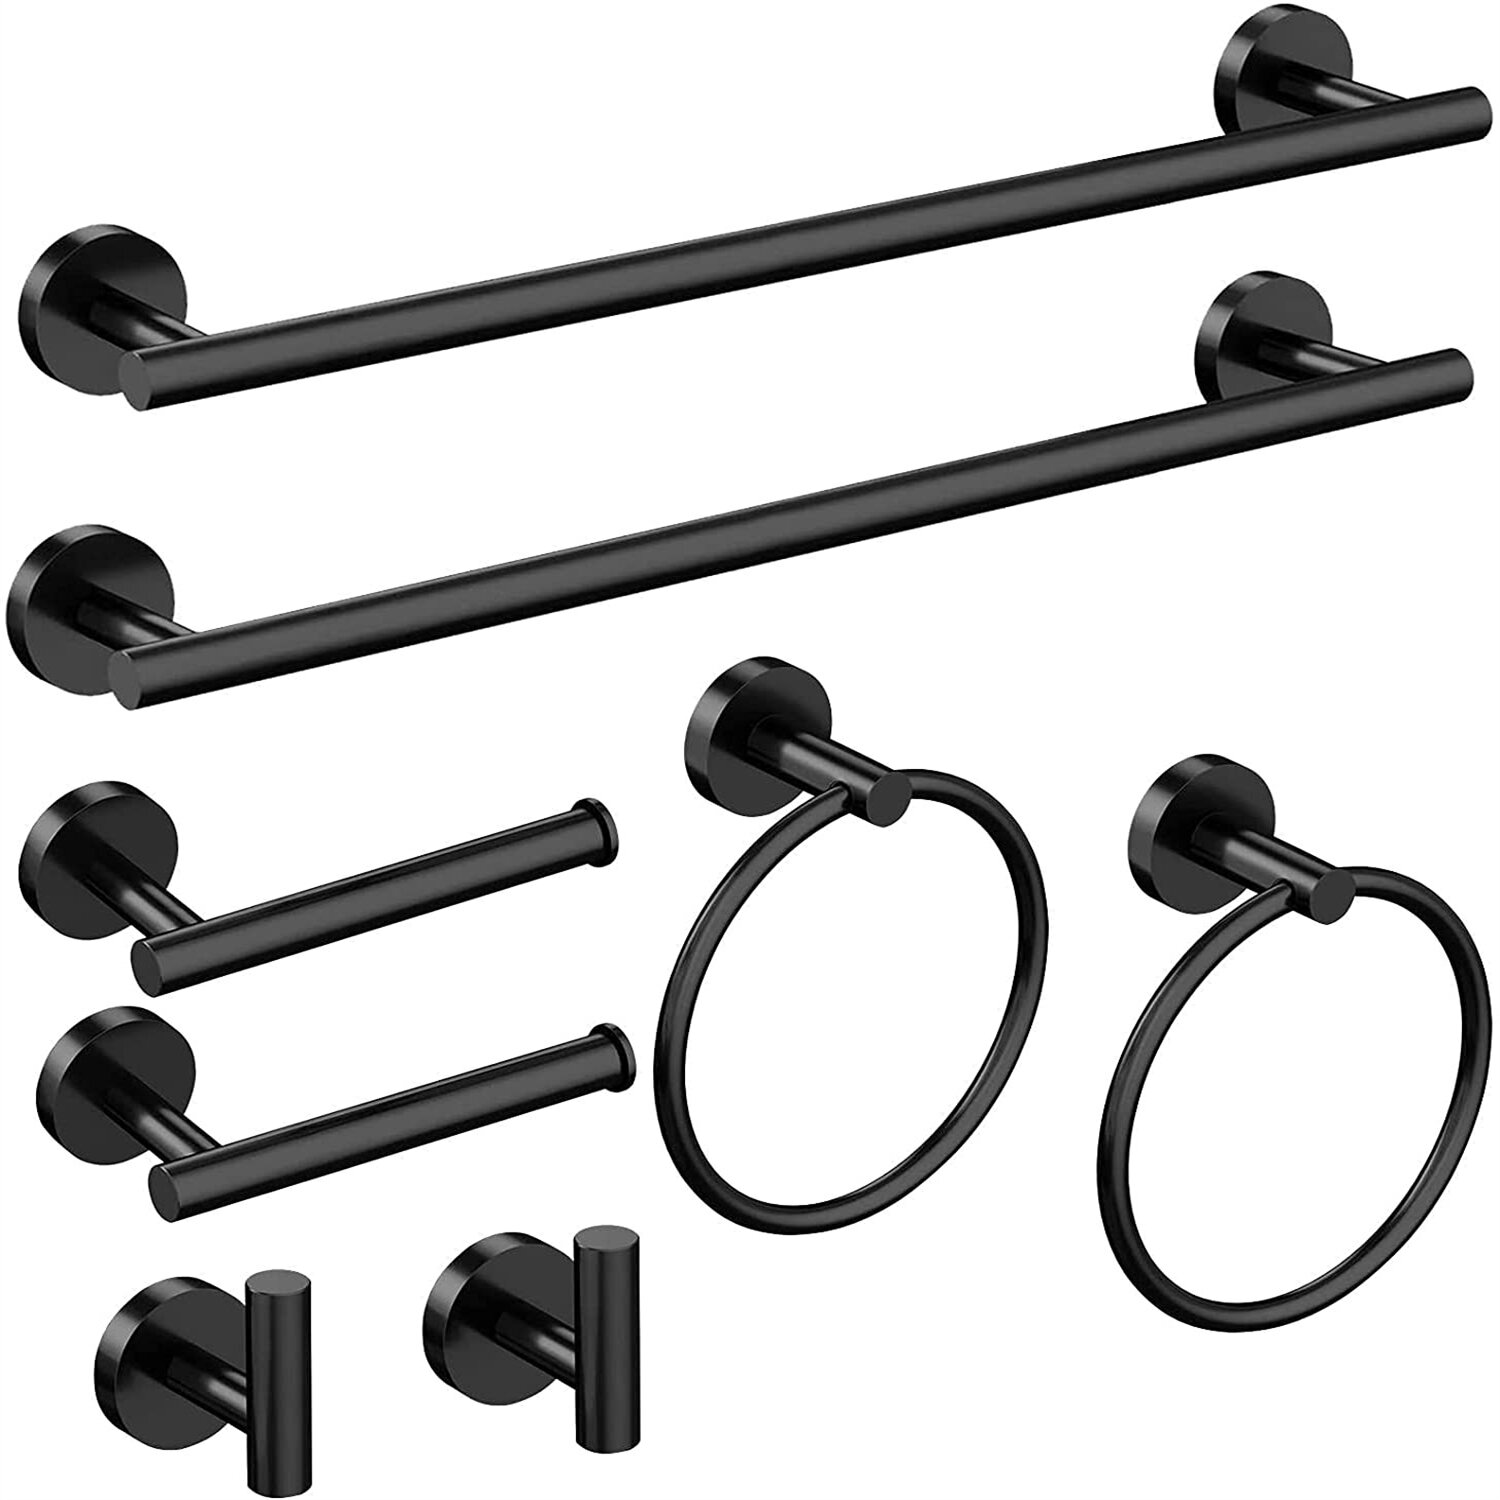 Brushed Nickel Bathroom Hardware Accessories 4 Piece Set with 24" Towel Bar 